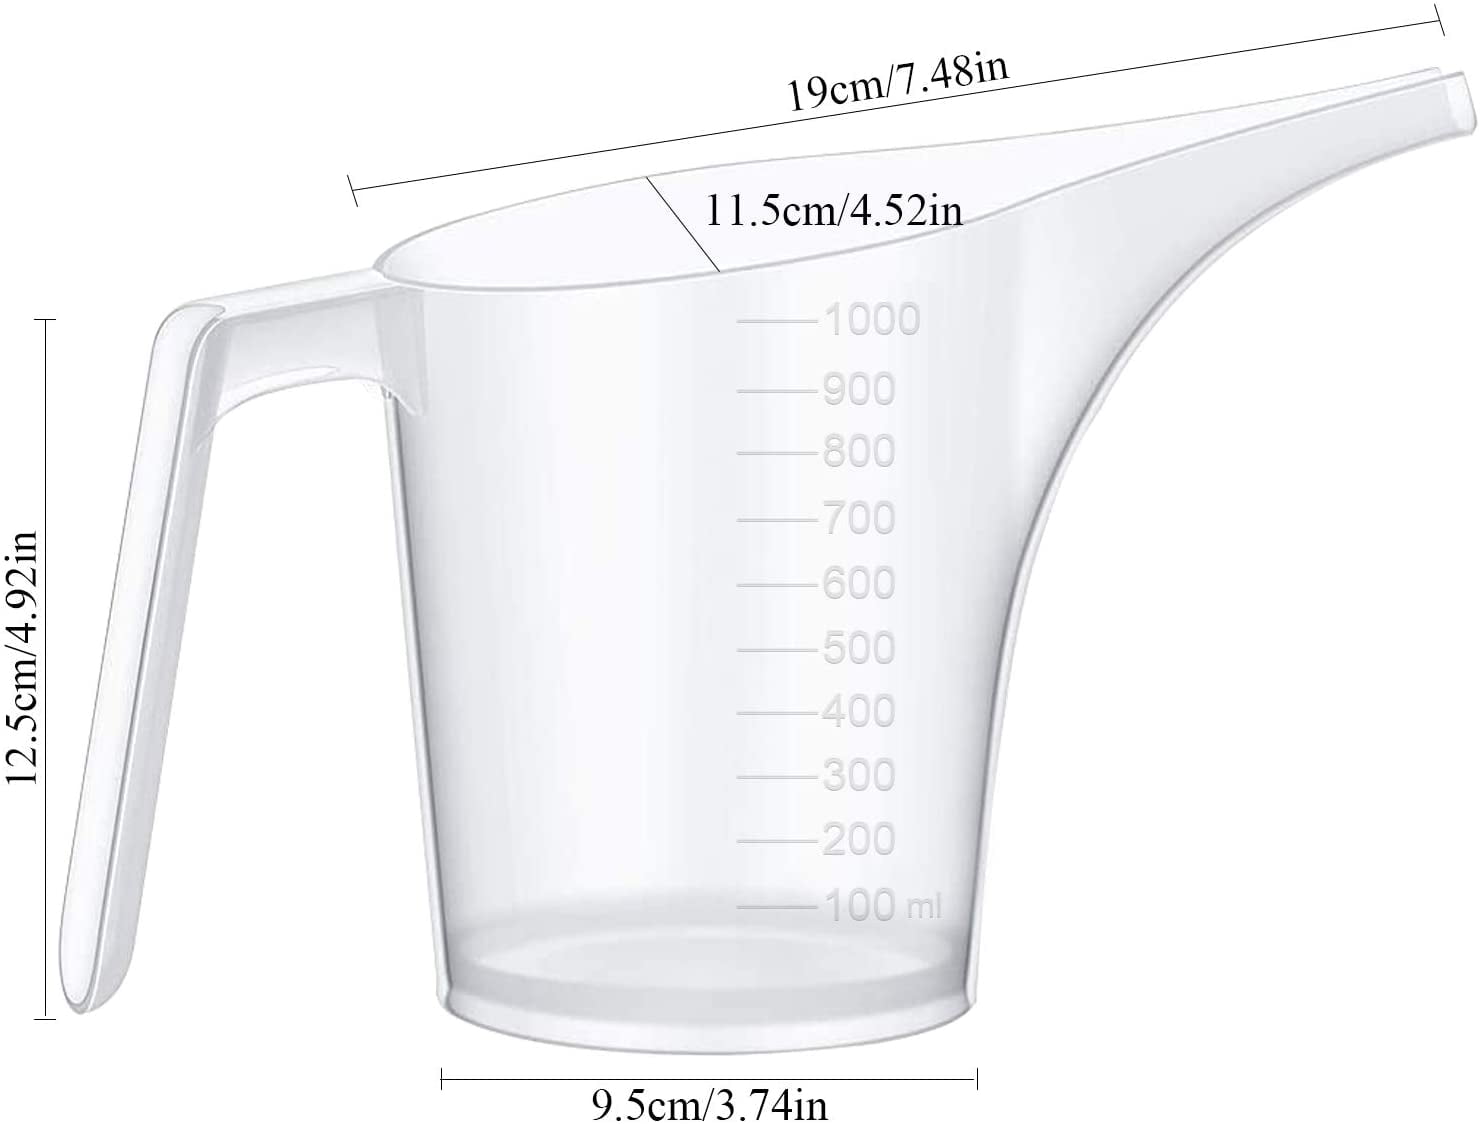 Wet Measure Spoons, Pitcher, & Funnel